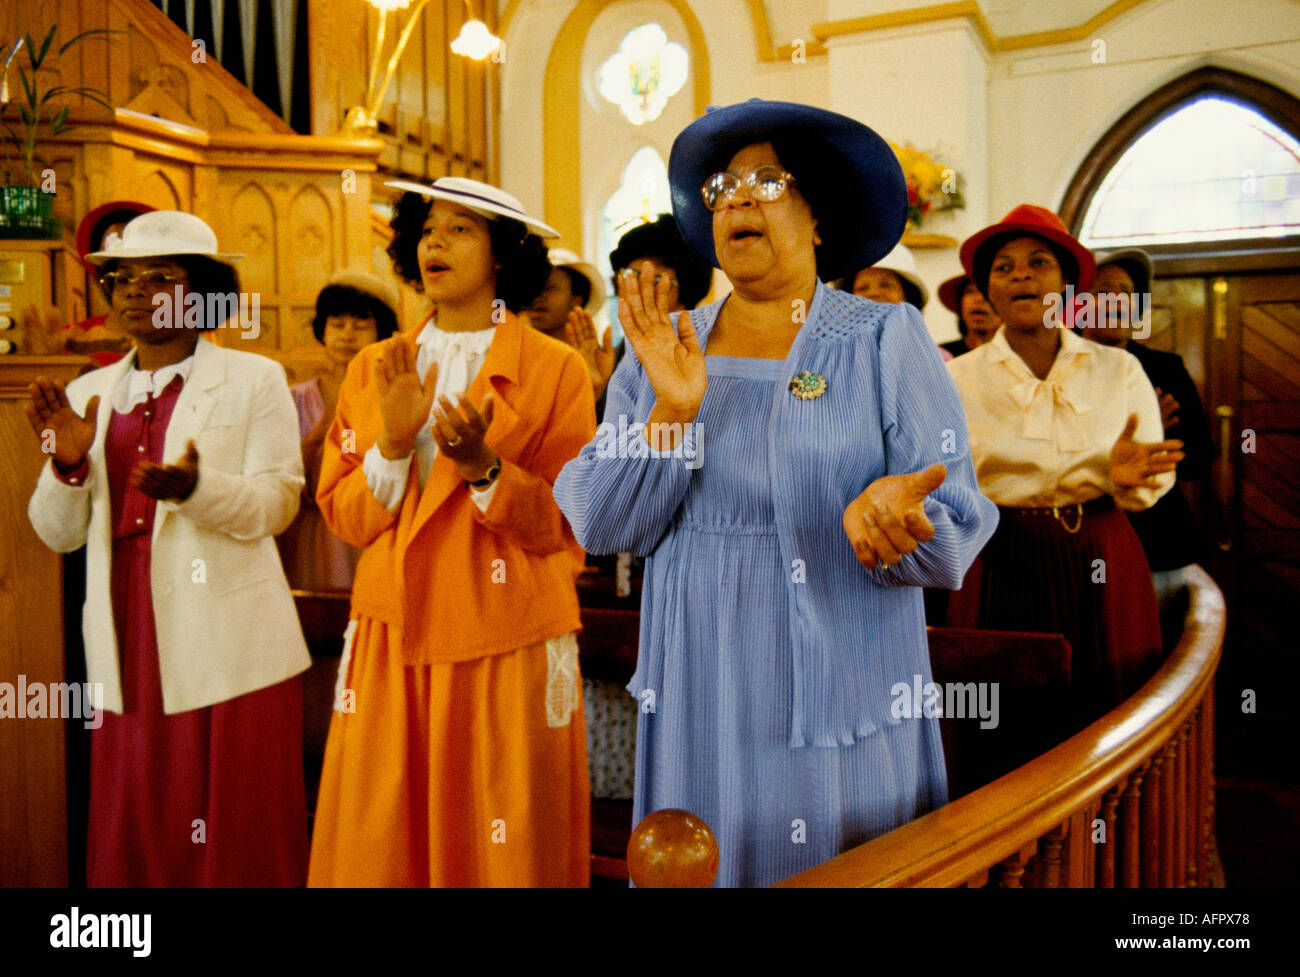 Pentecostal church service in Brixton 1990s UK Hymn singing clapping hands in time to music. Sunday worship south London 90s England HOMER SYKES Stock Photo